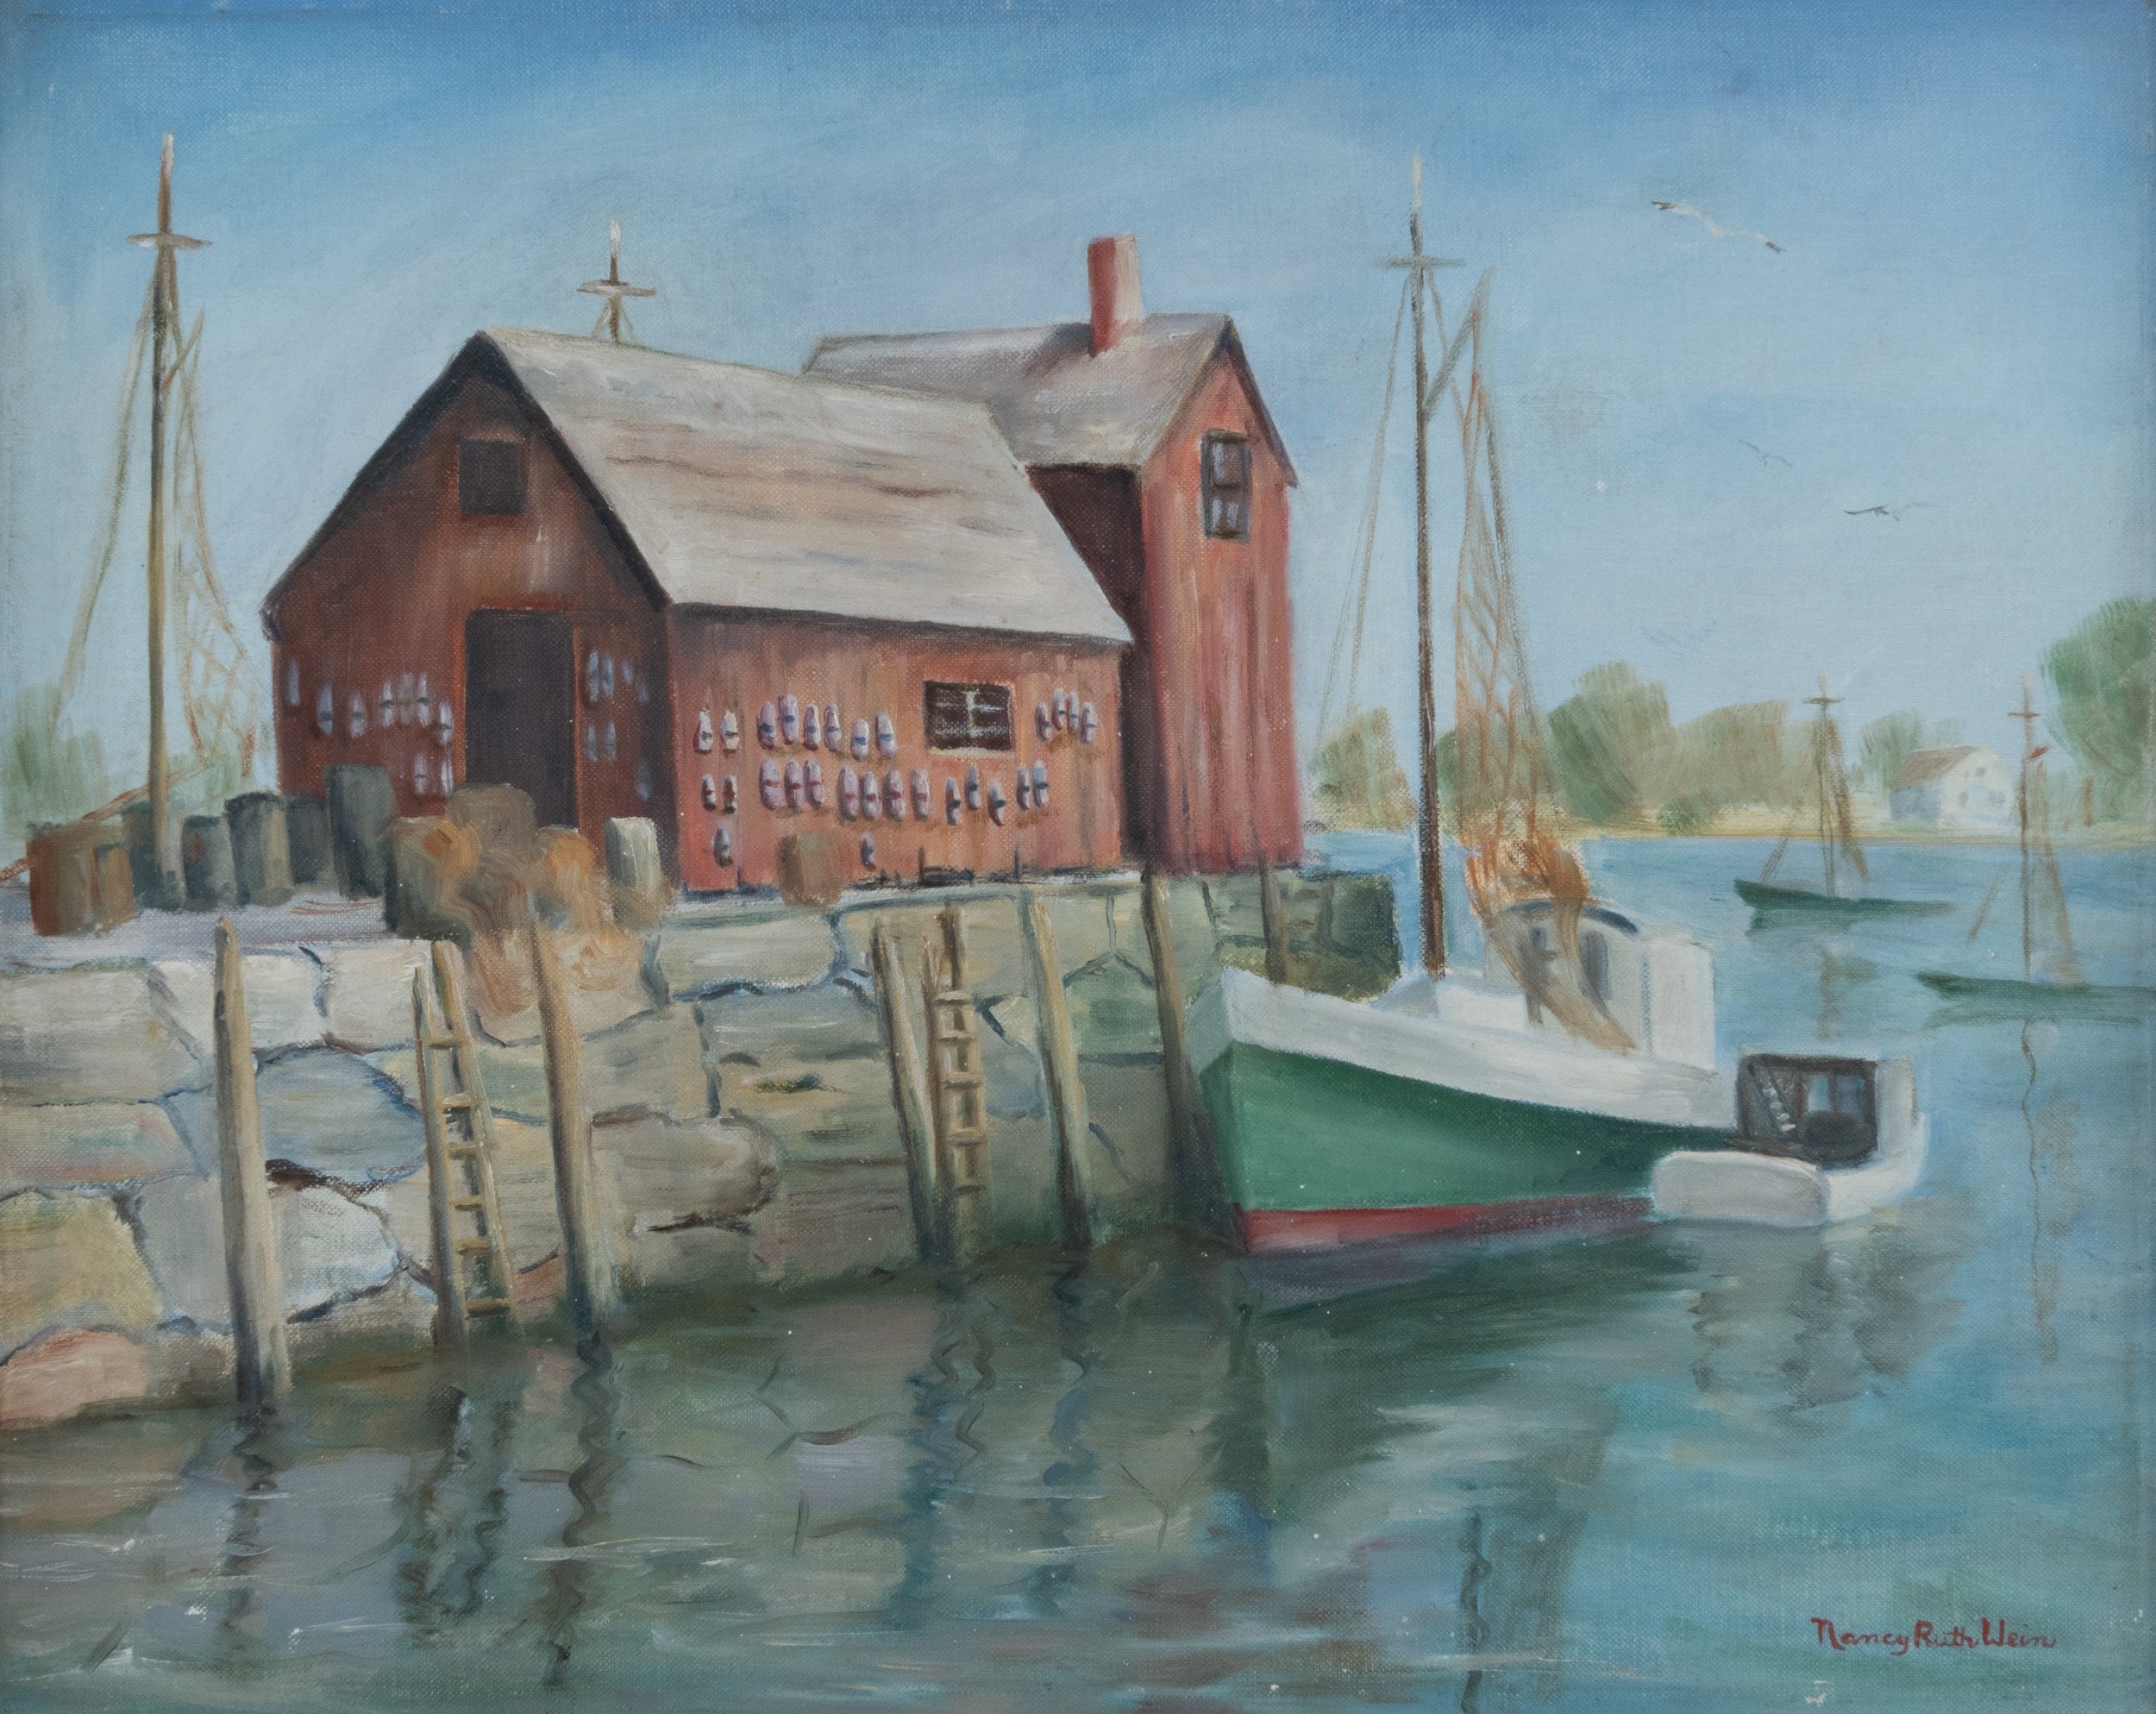 Motif No. 1 Rockport, 1953, oil on canvas, 16x20 inches